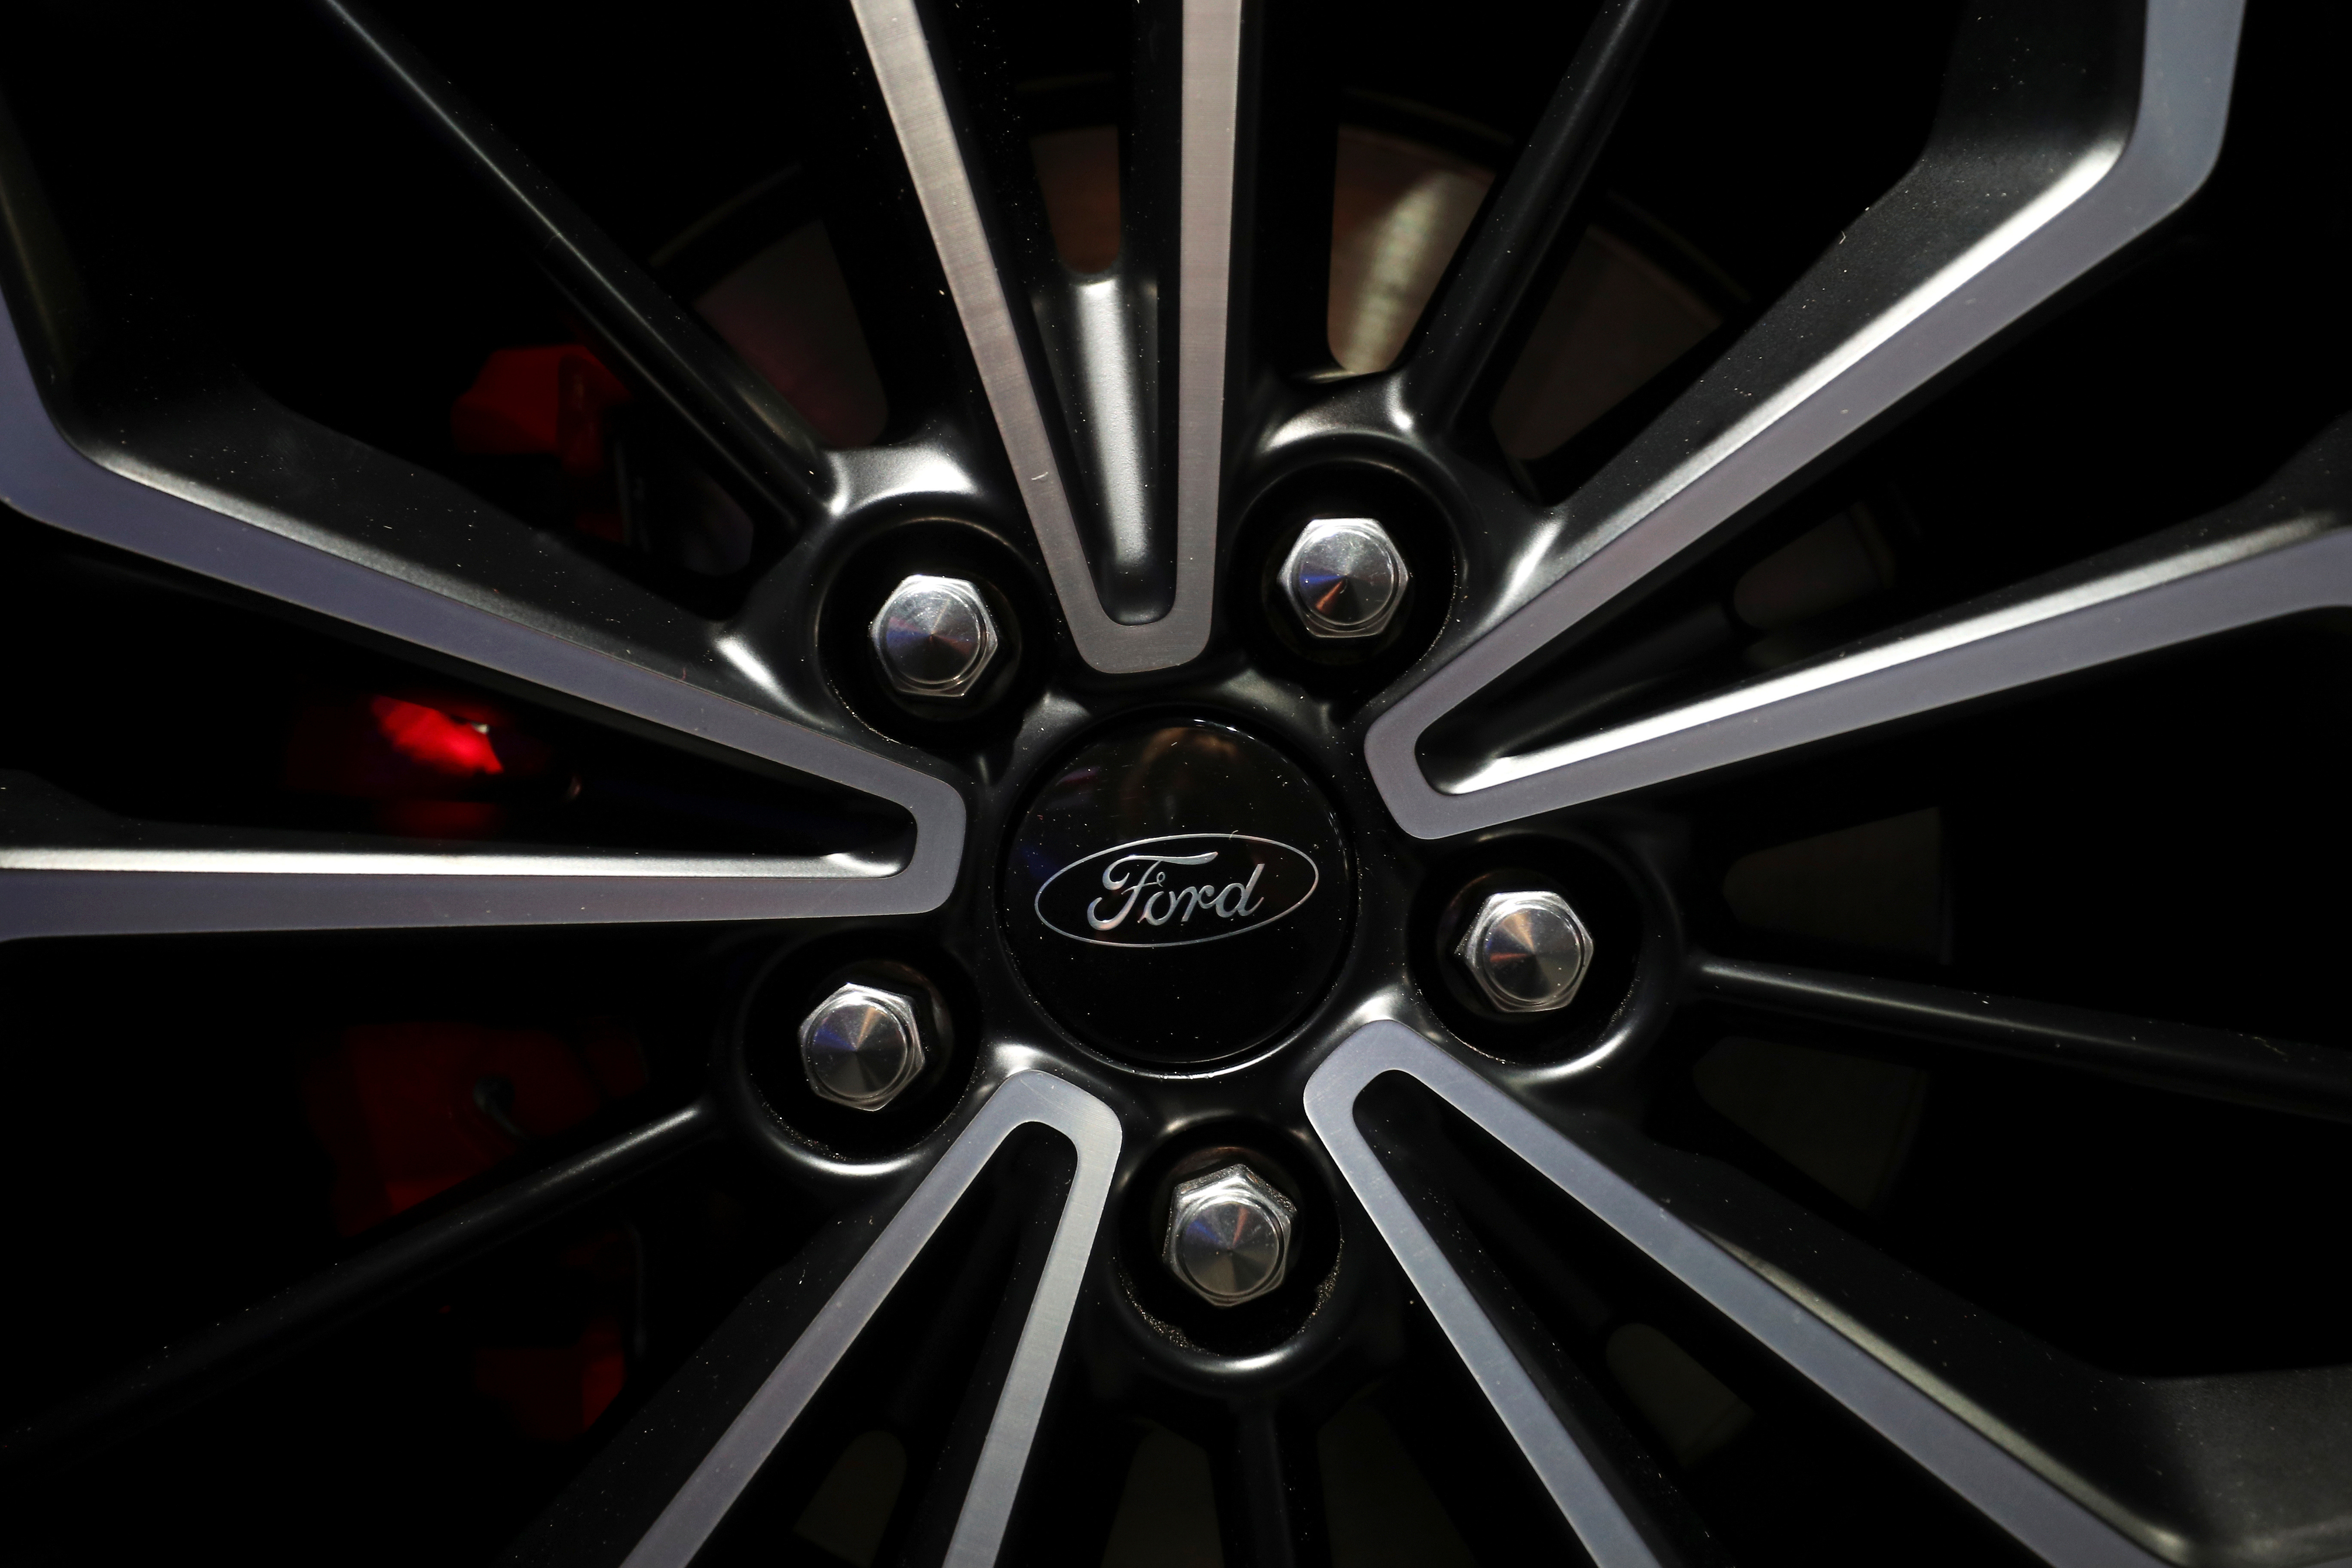 The wheel of a 2018 Ford Focus is shown at the new model's launch in London